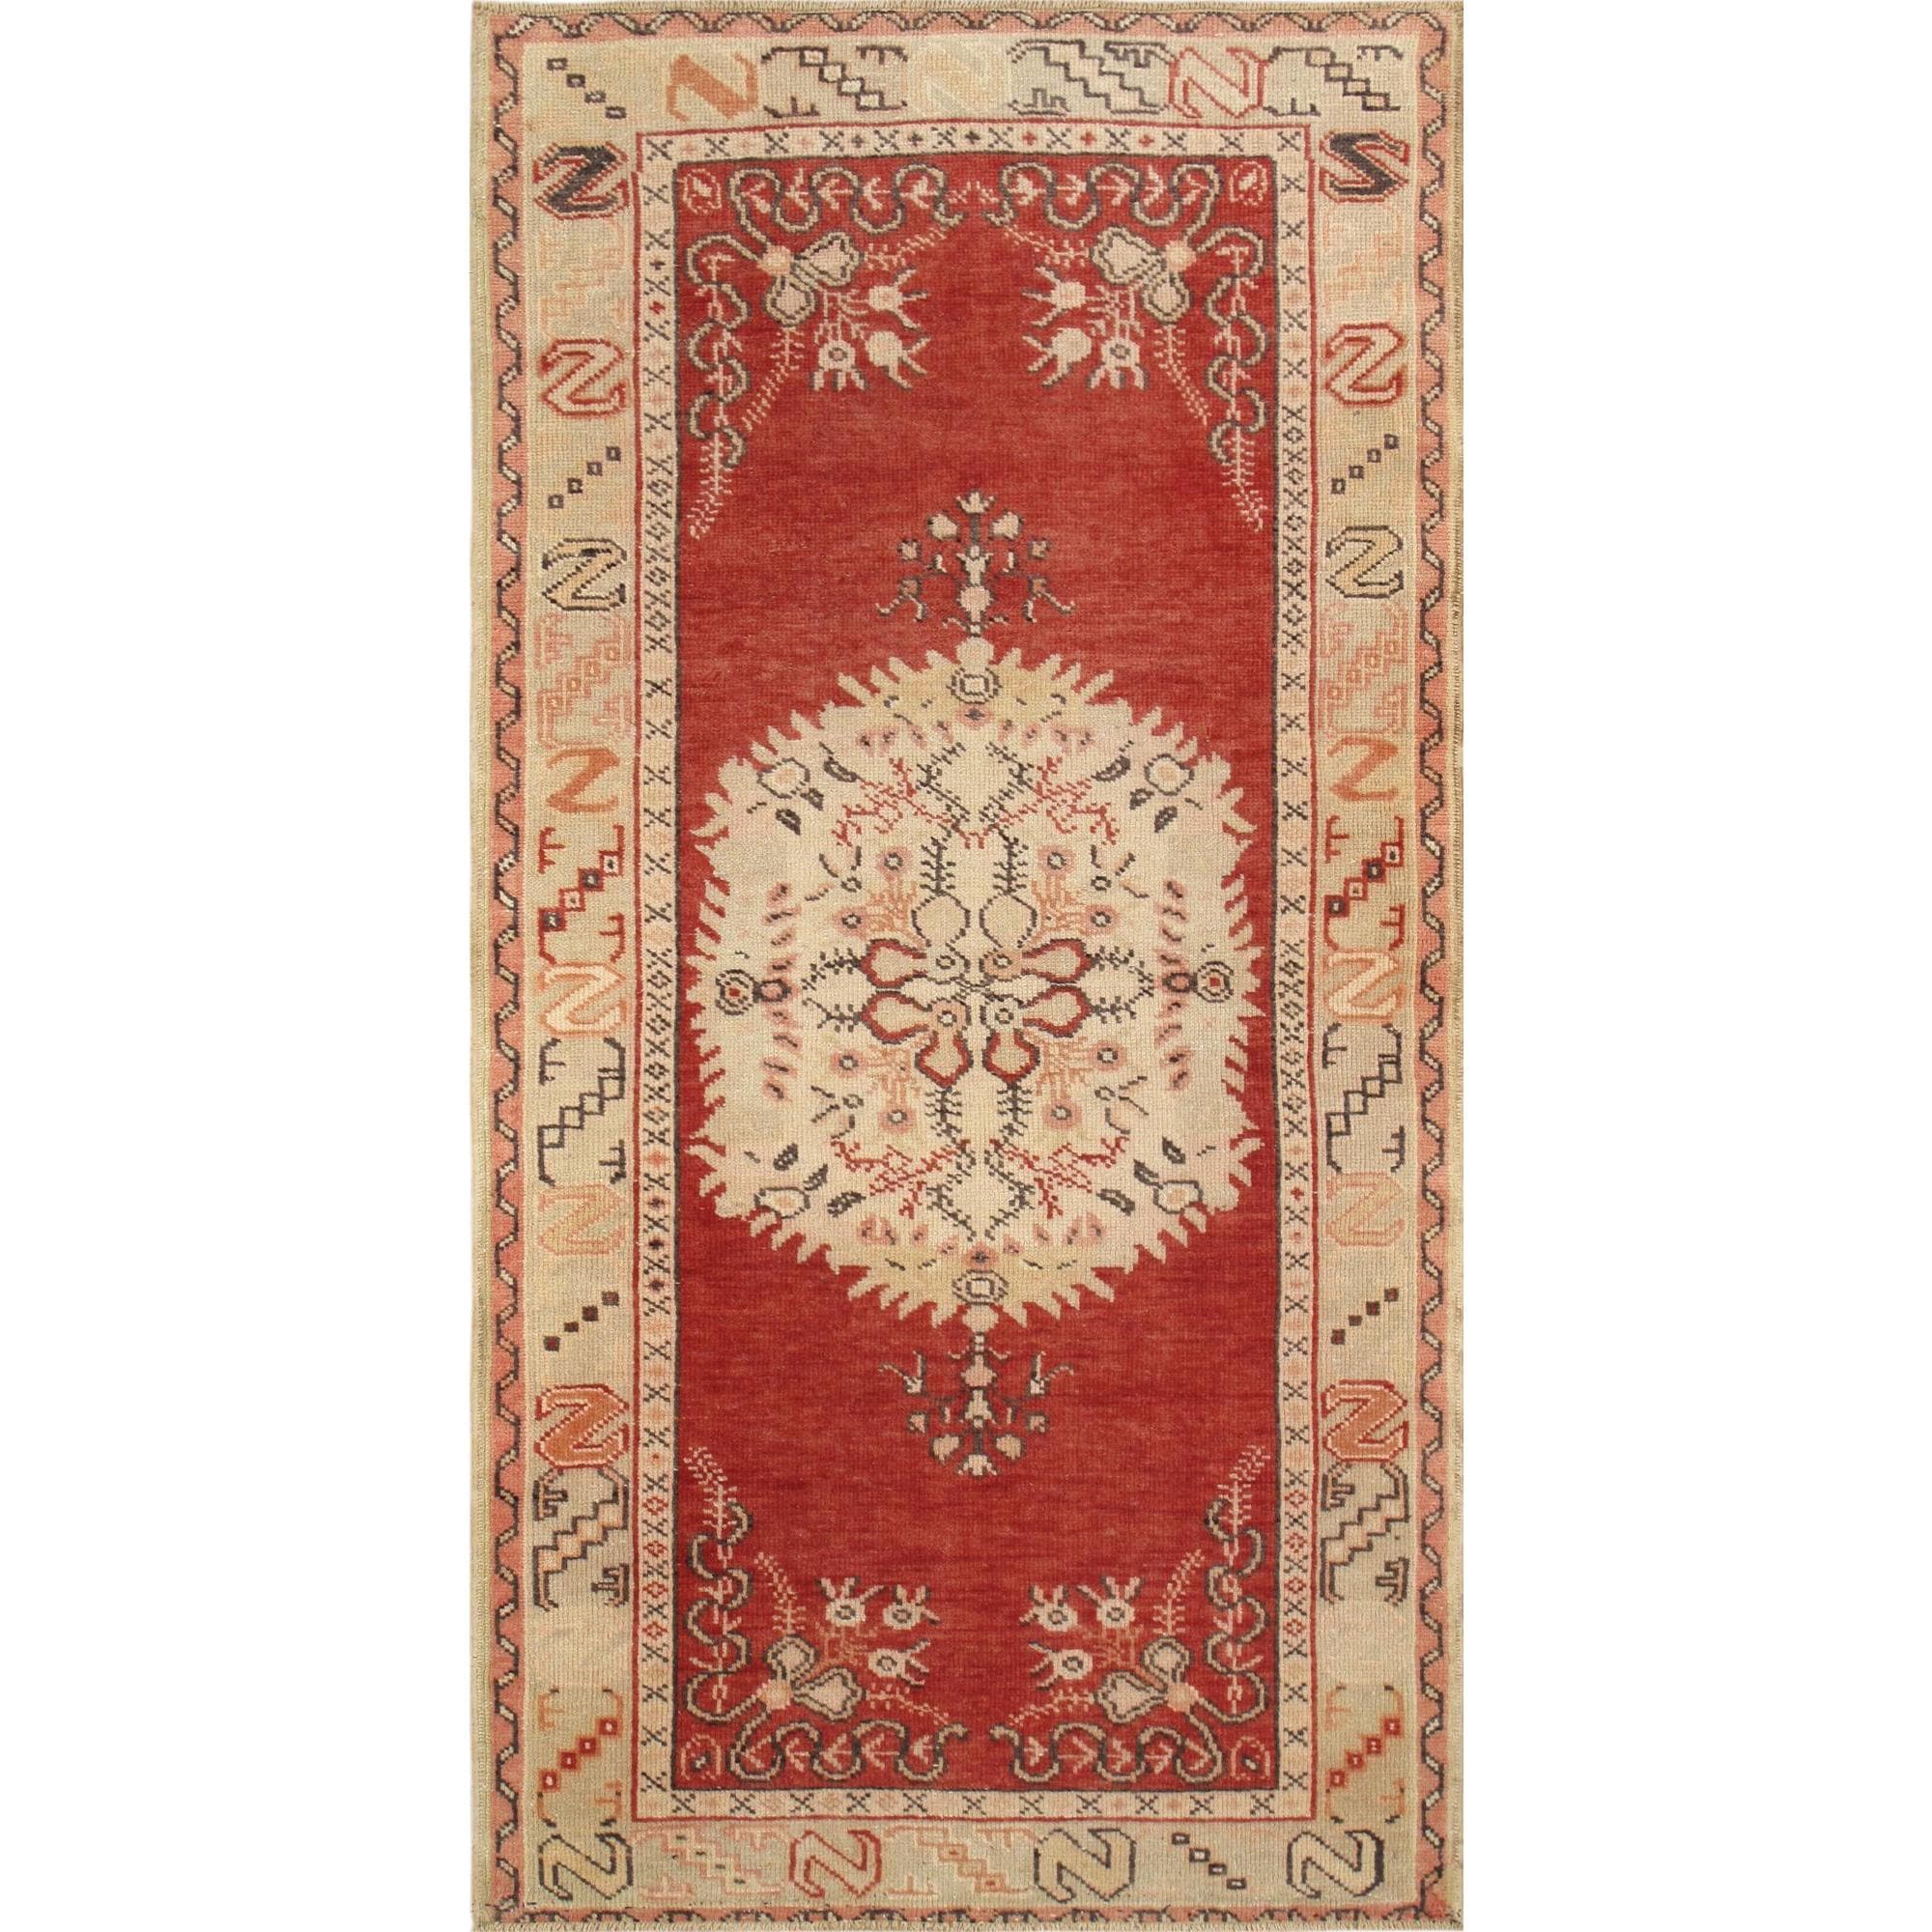 https://ak1.ostkcdn.com/images/products/12312666/Pasargad-Turkish-Oushak-Hand-Knotted-Coral-Beige-Wool-Rug-3-x-7-2cc33d99-e3a0-4745-8842-154fbaf14858.jpg